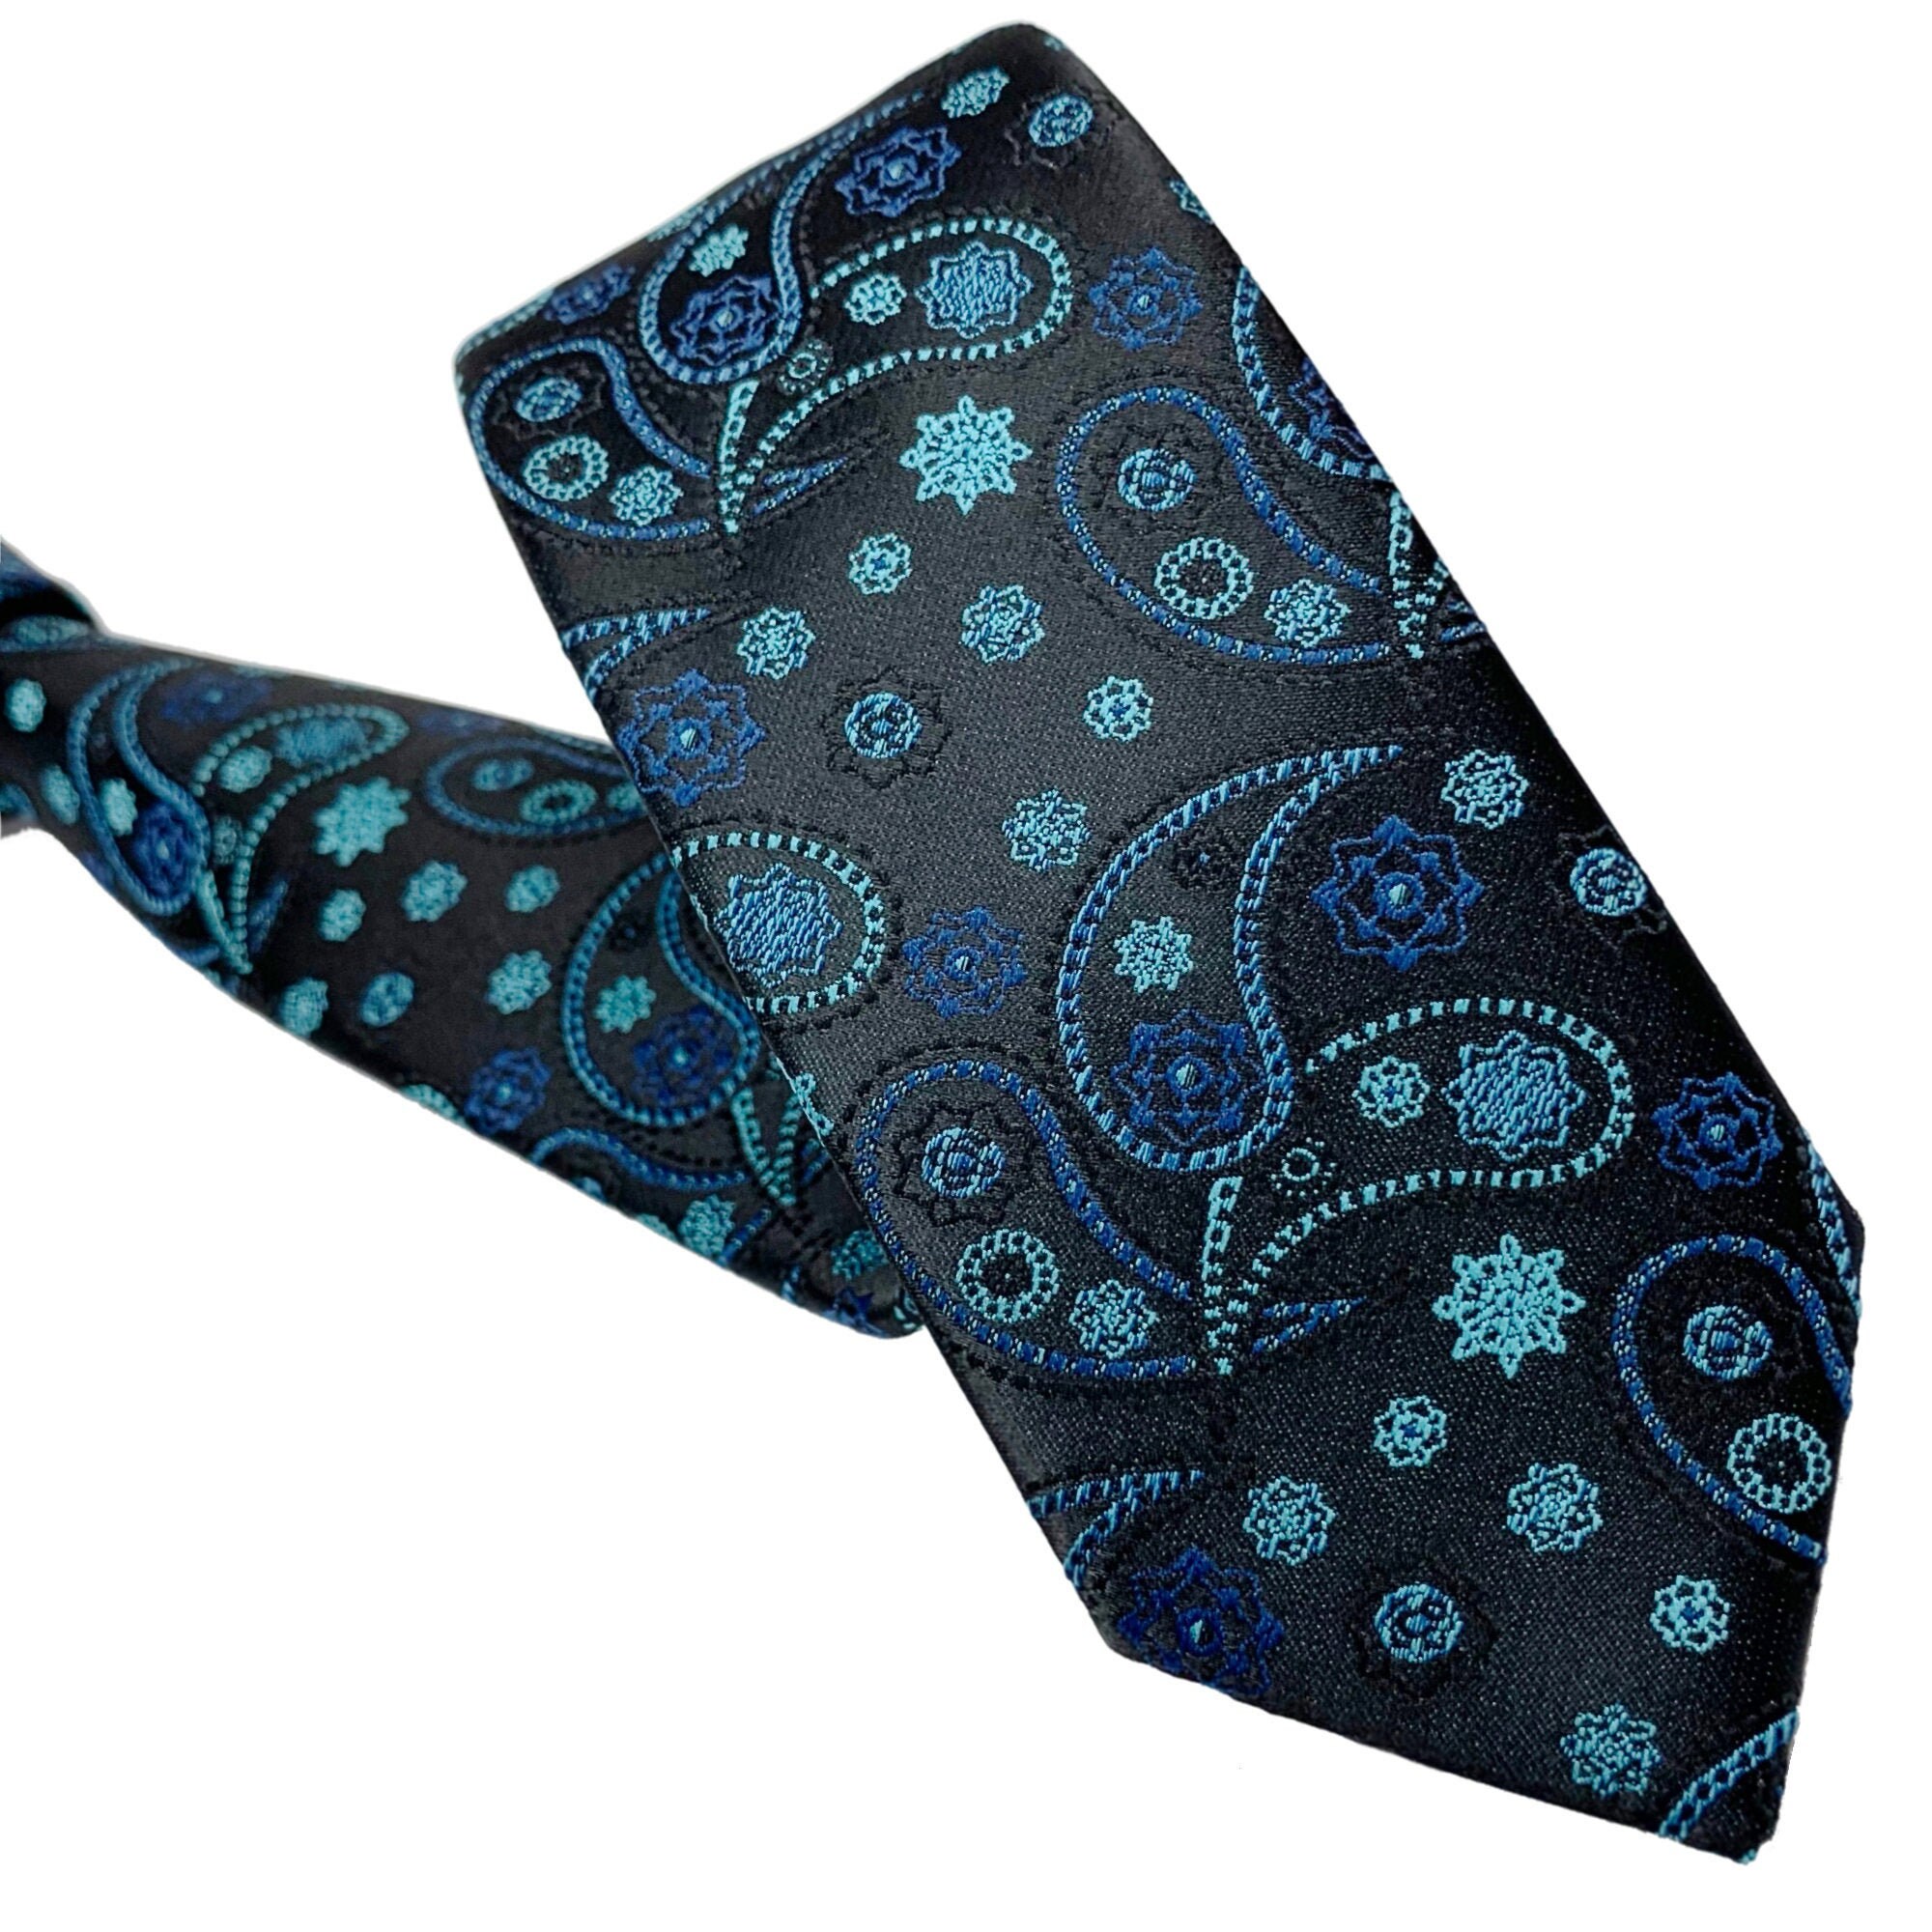 Tie With Turquoise Blue Leaves and Star Flowers on a Black - Etsy